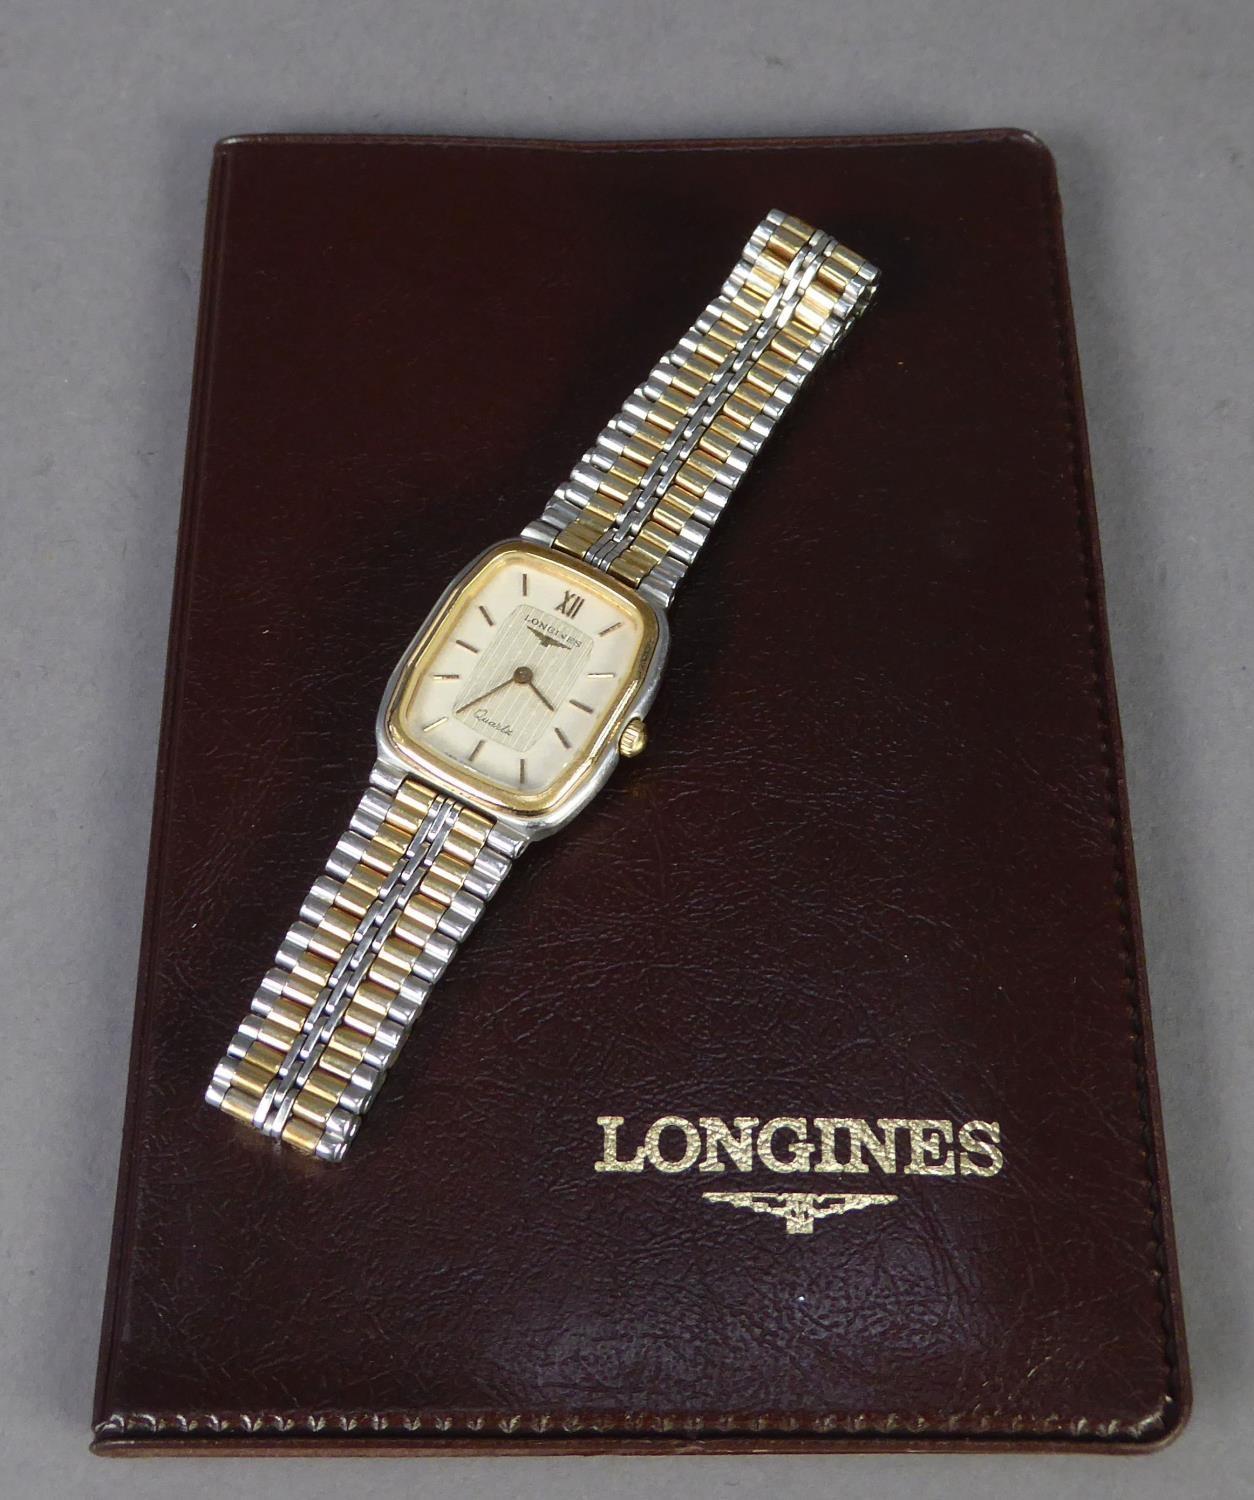 1980's LONGINES STAINLESS STEEL PARCEL GILDED LADY'S QUARTZ BRACELET WRIST WATCH with accompanying - Image 4 of 4